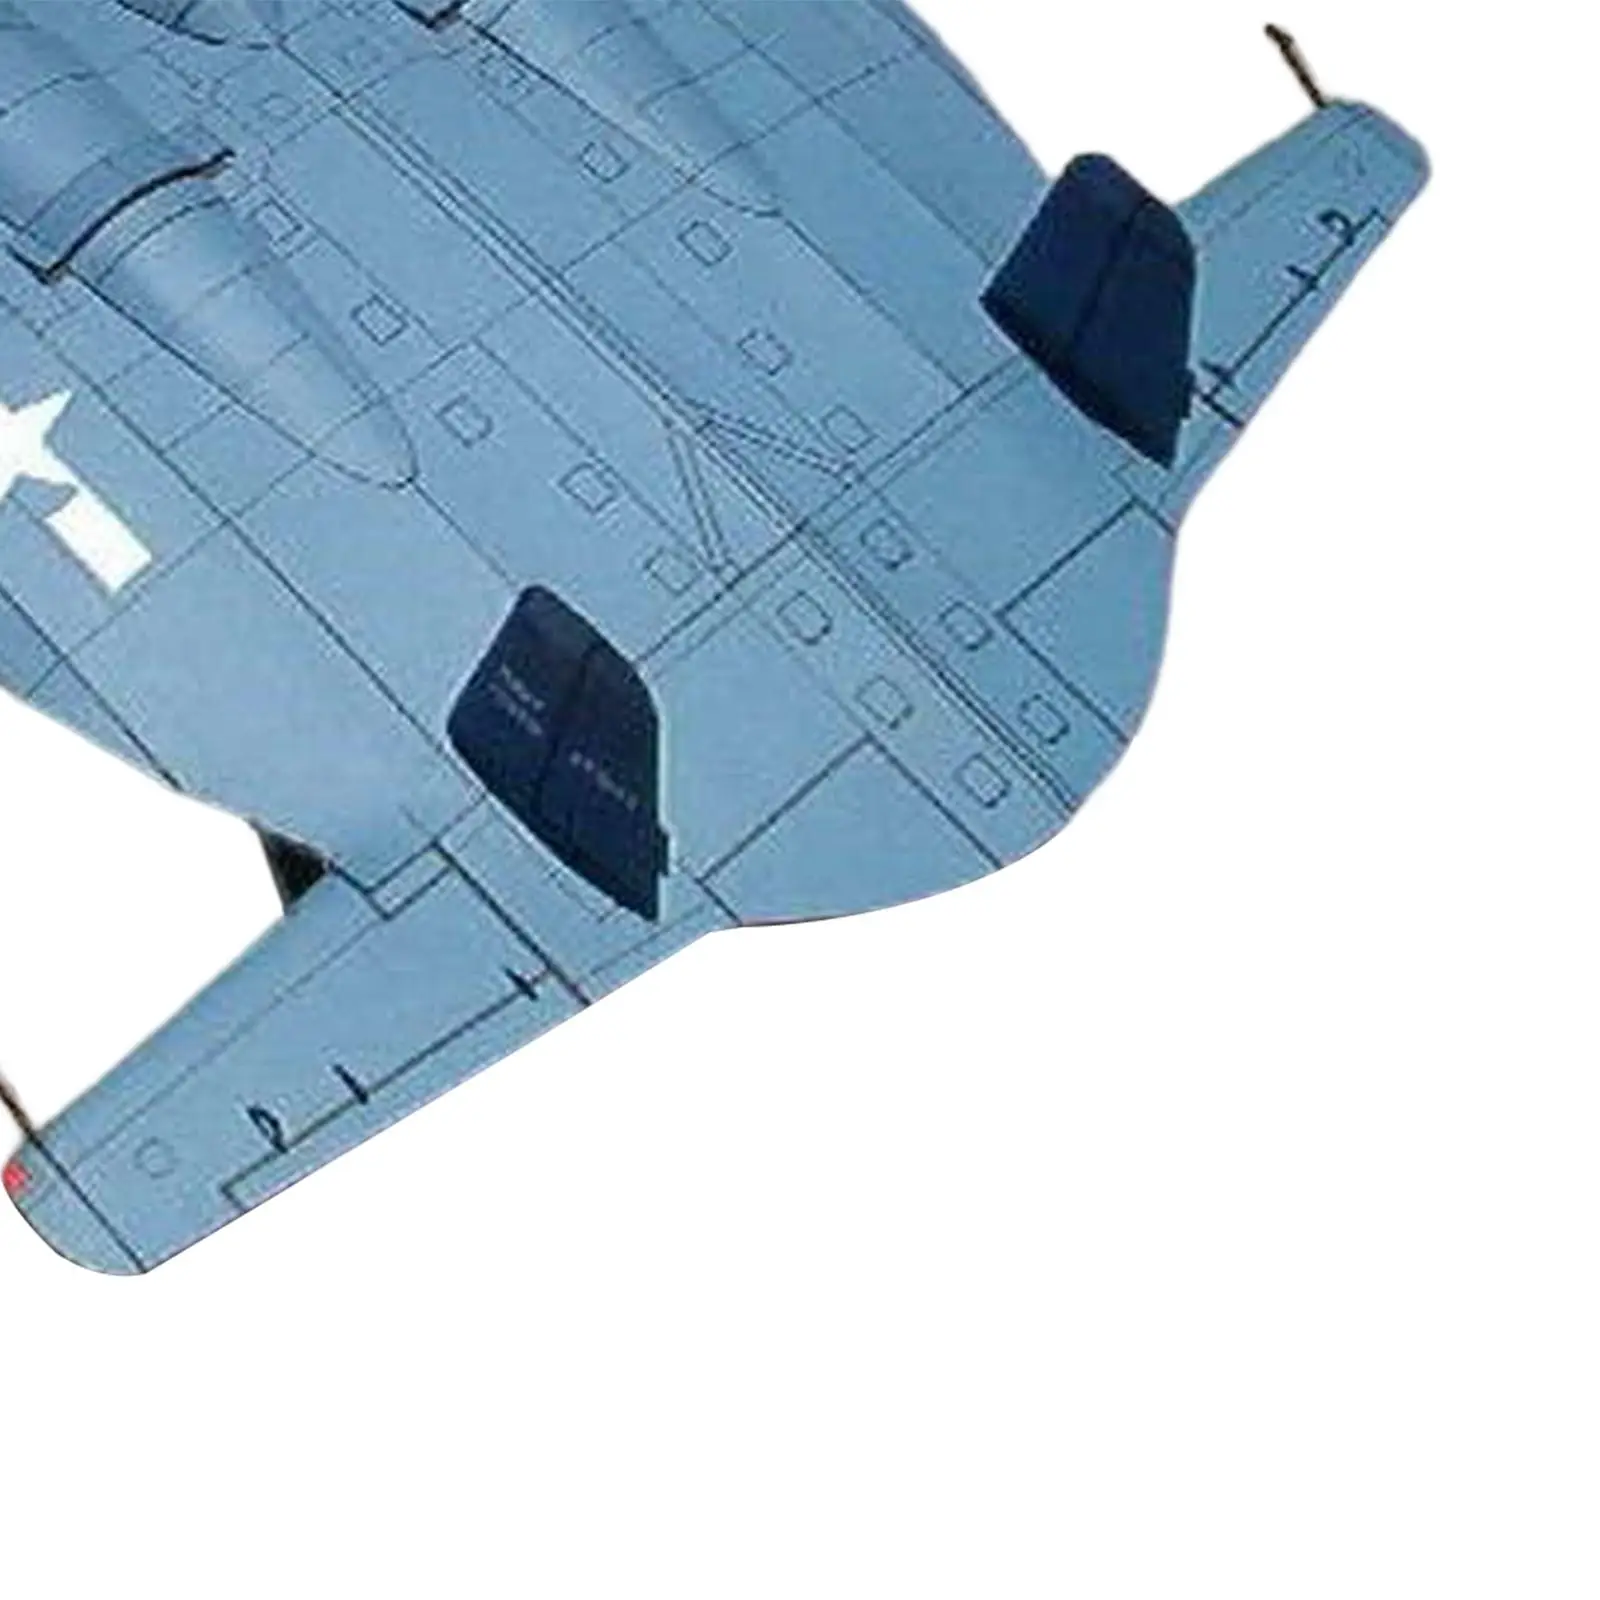 Air Aviation Fighter Aircraft Paper Model Hobby for Office Shelf Kids Gift